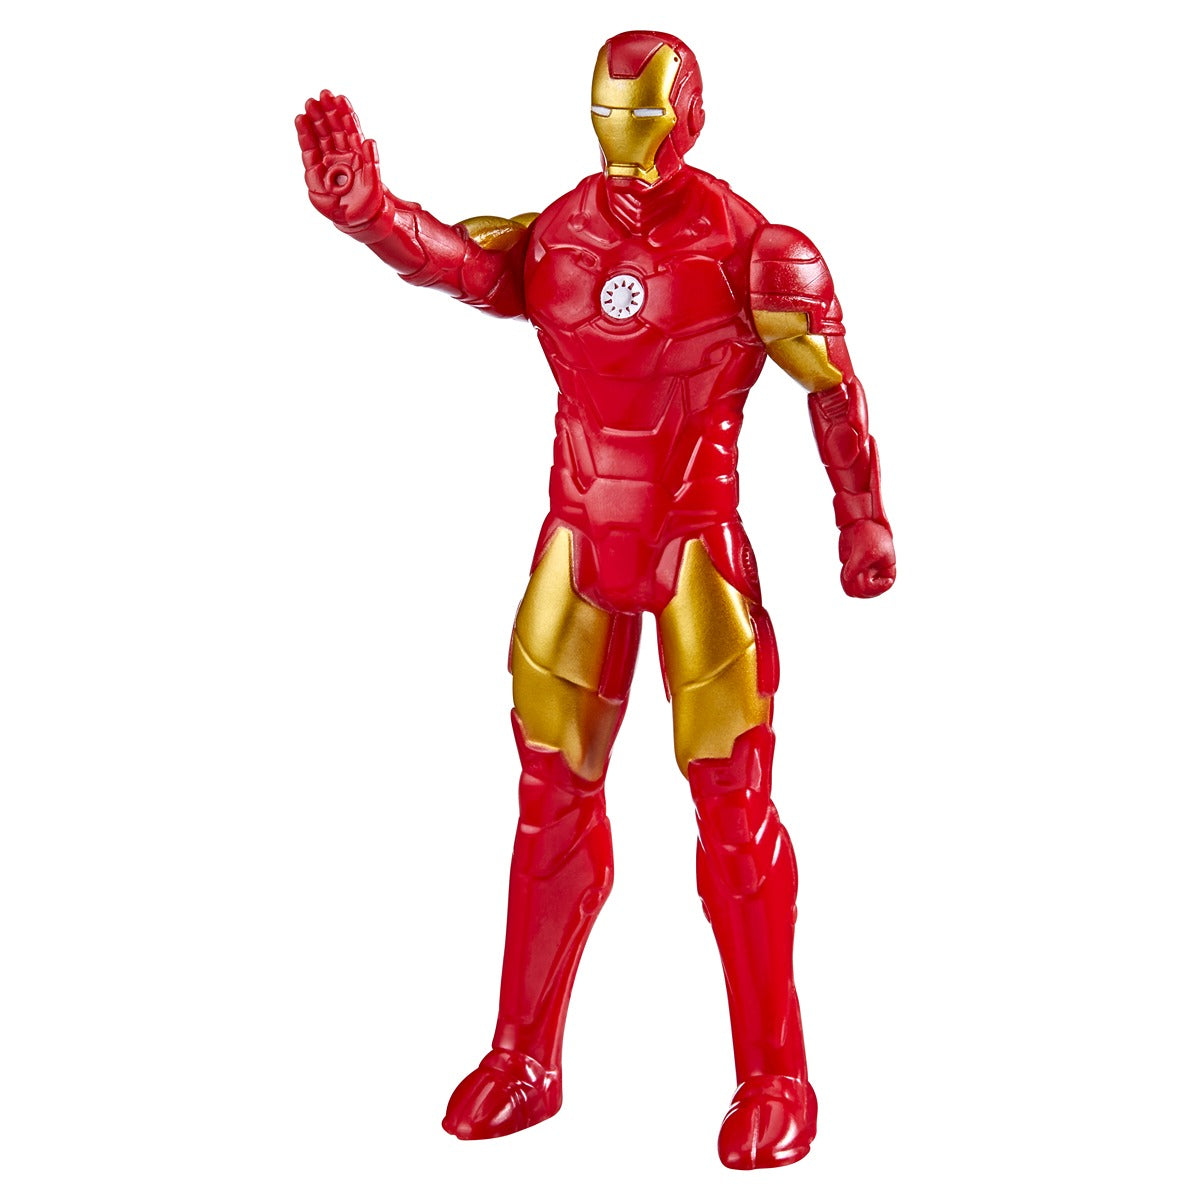 Marvel Classic Iron Man 6 inch Value Figure for Ages 5+